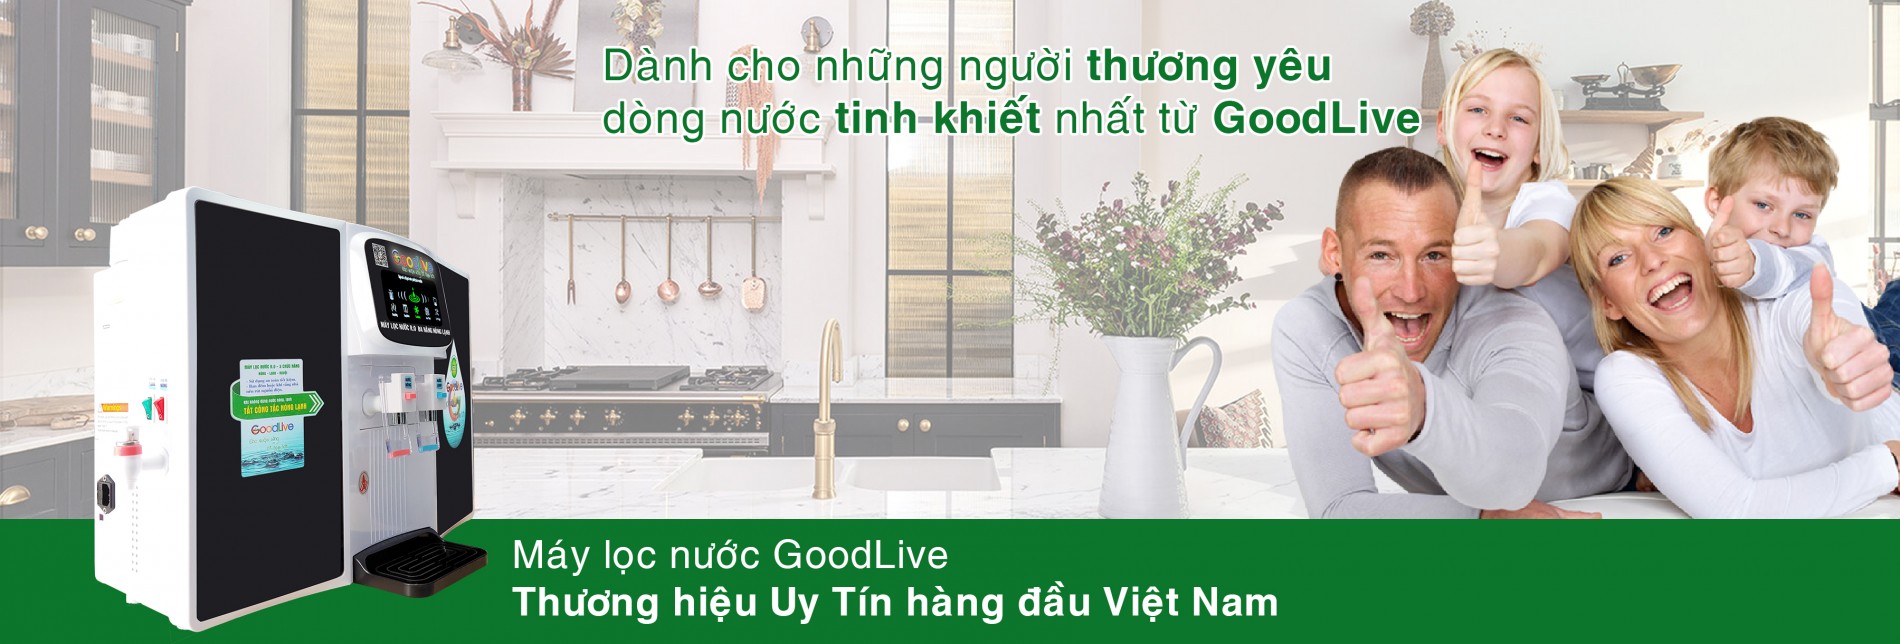 may-loc-nuoc-goodlive